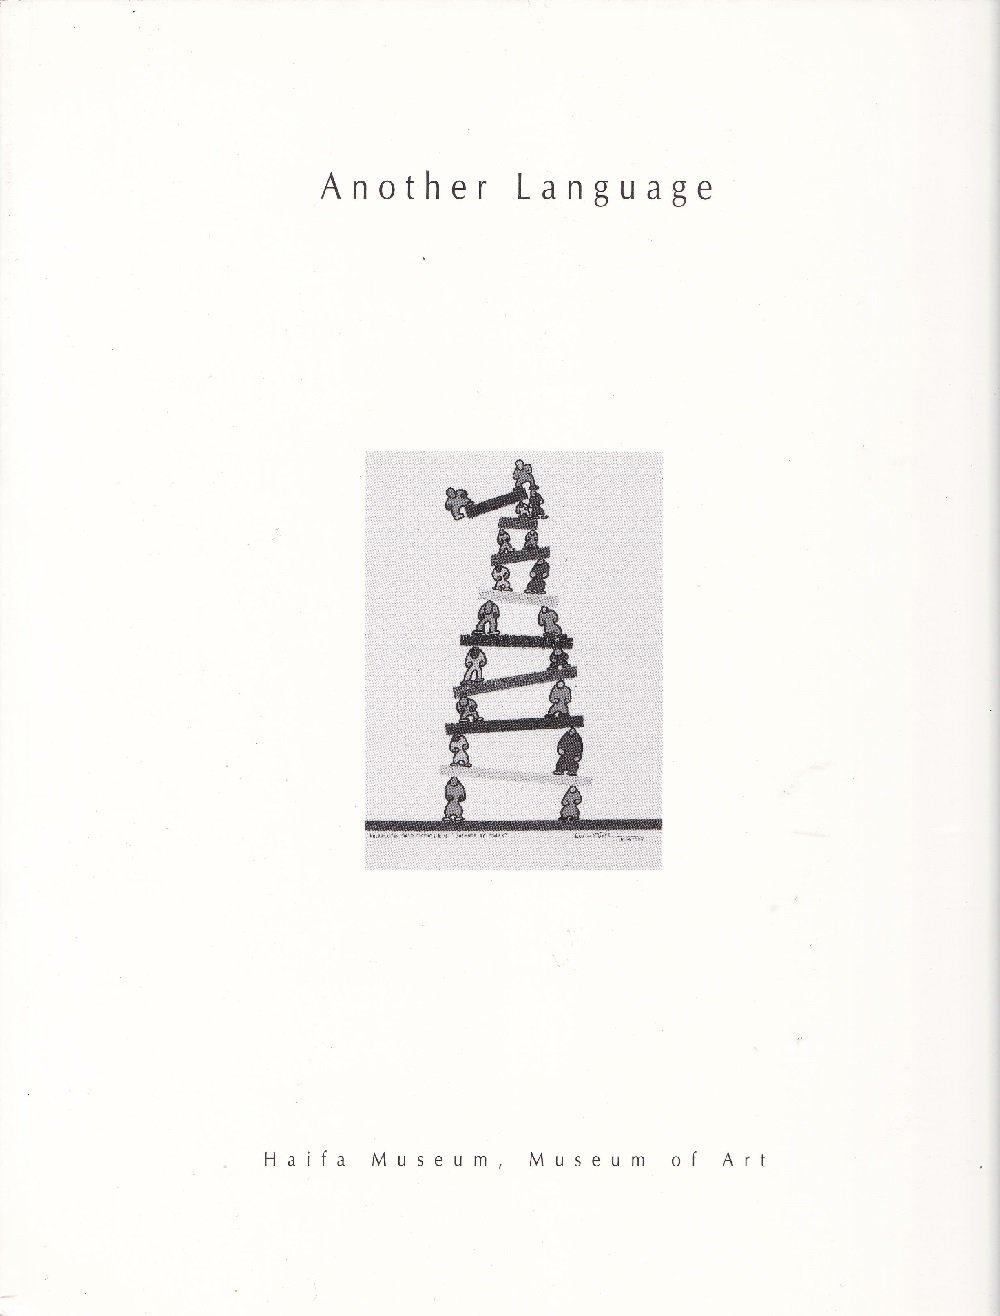   Another Language.  Exhibition. (Hebrew and english text). 